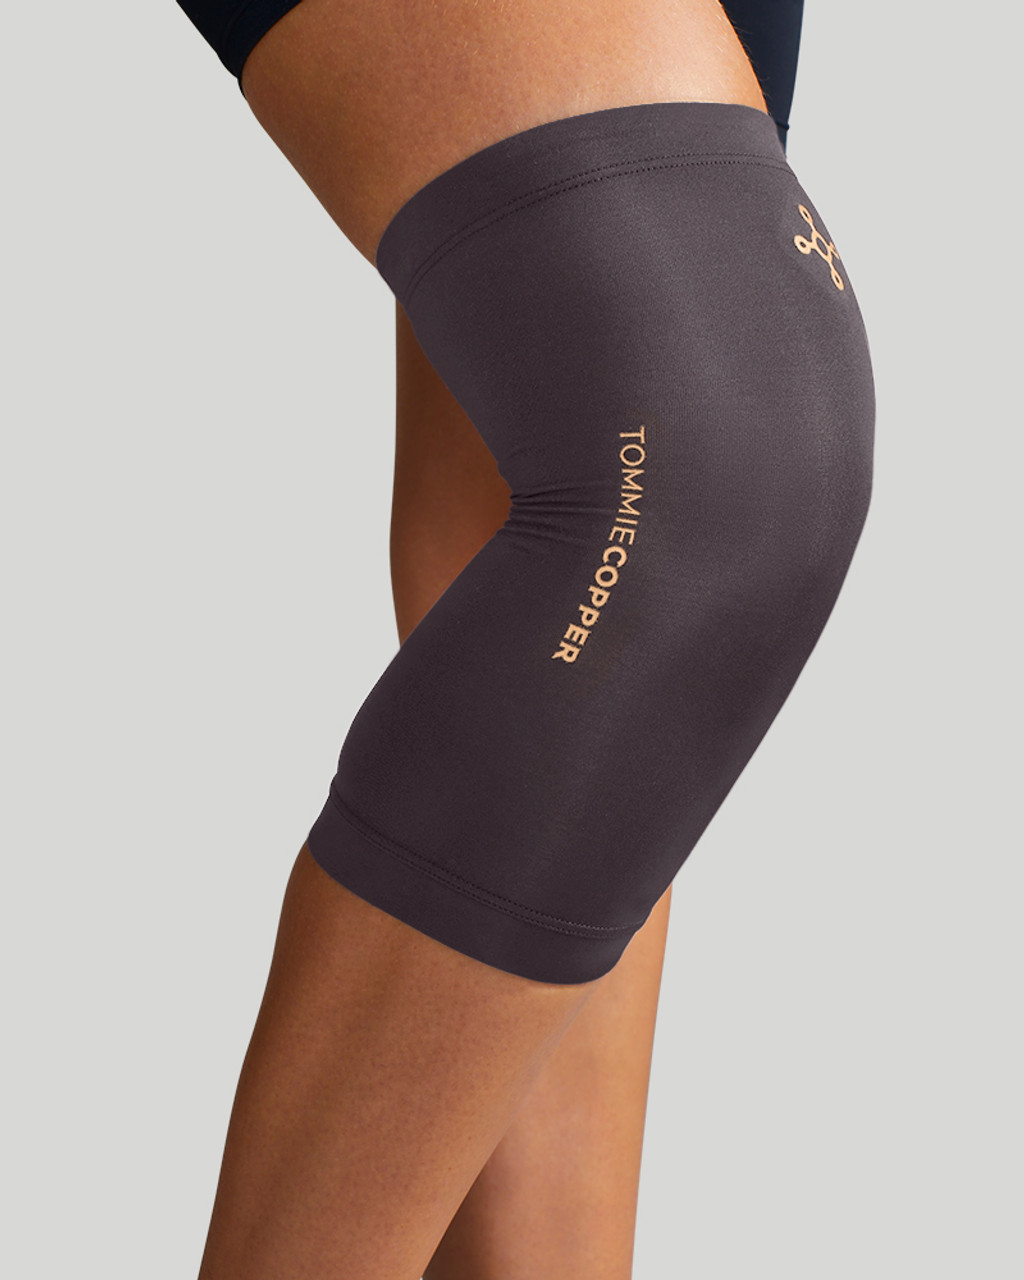 4028#High Quality Compression Copper Knee Brace Made in China